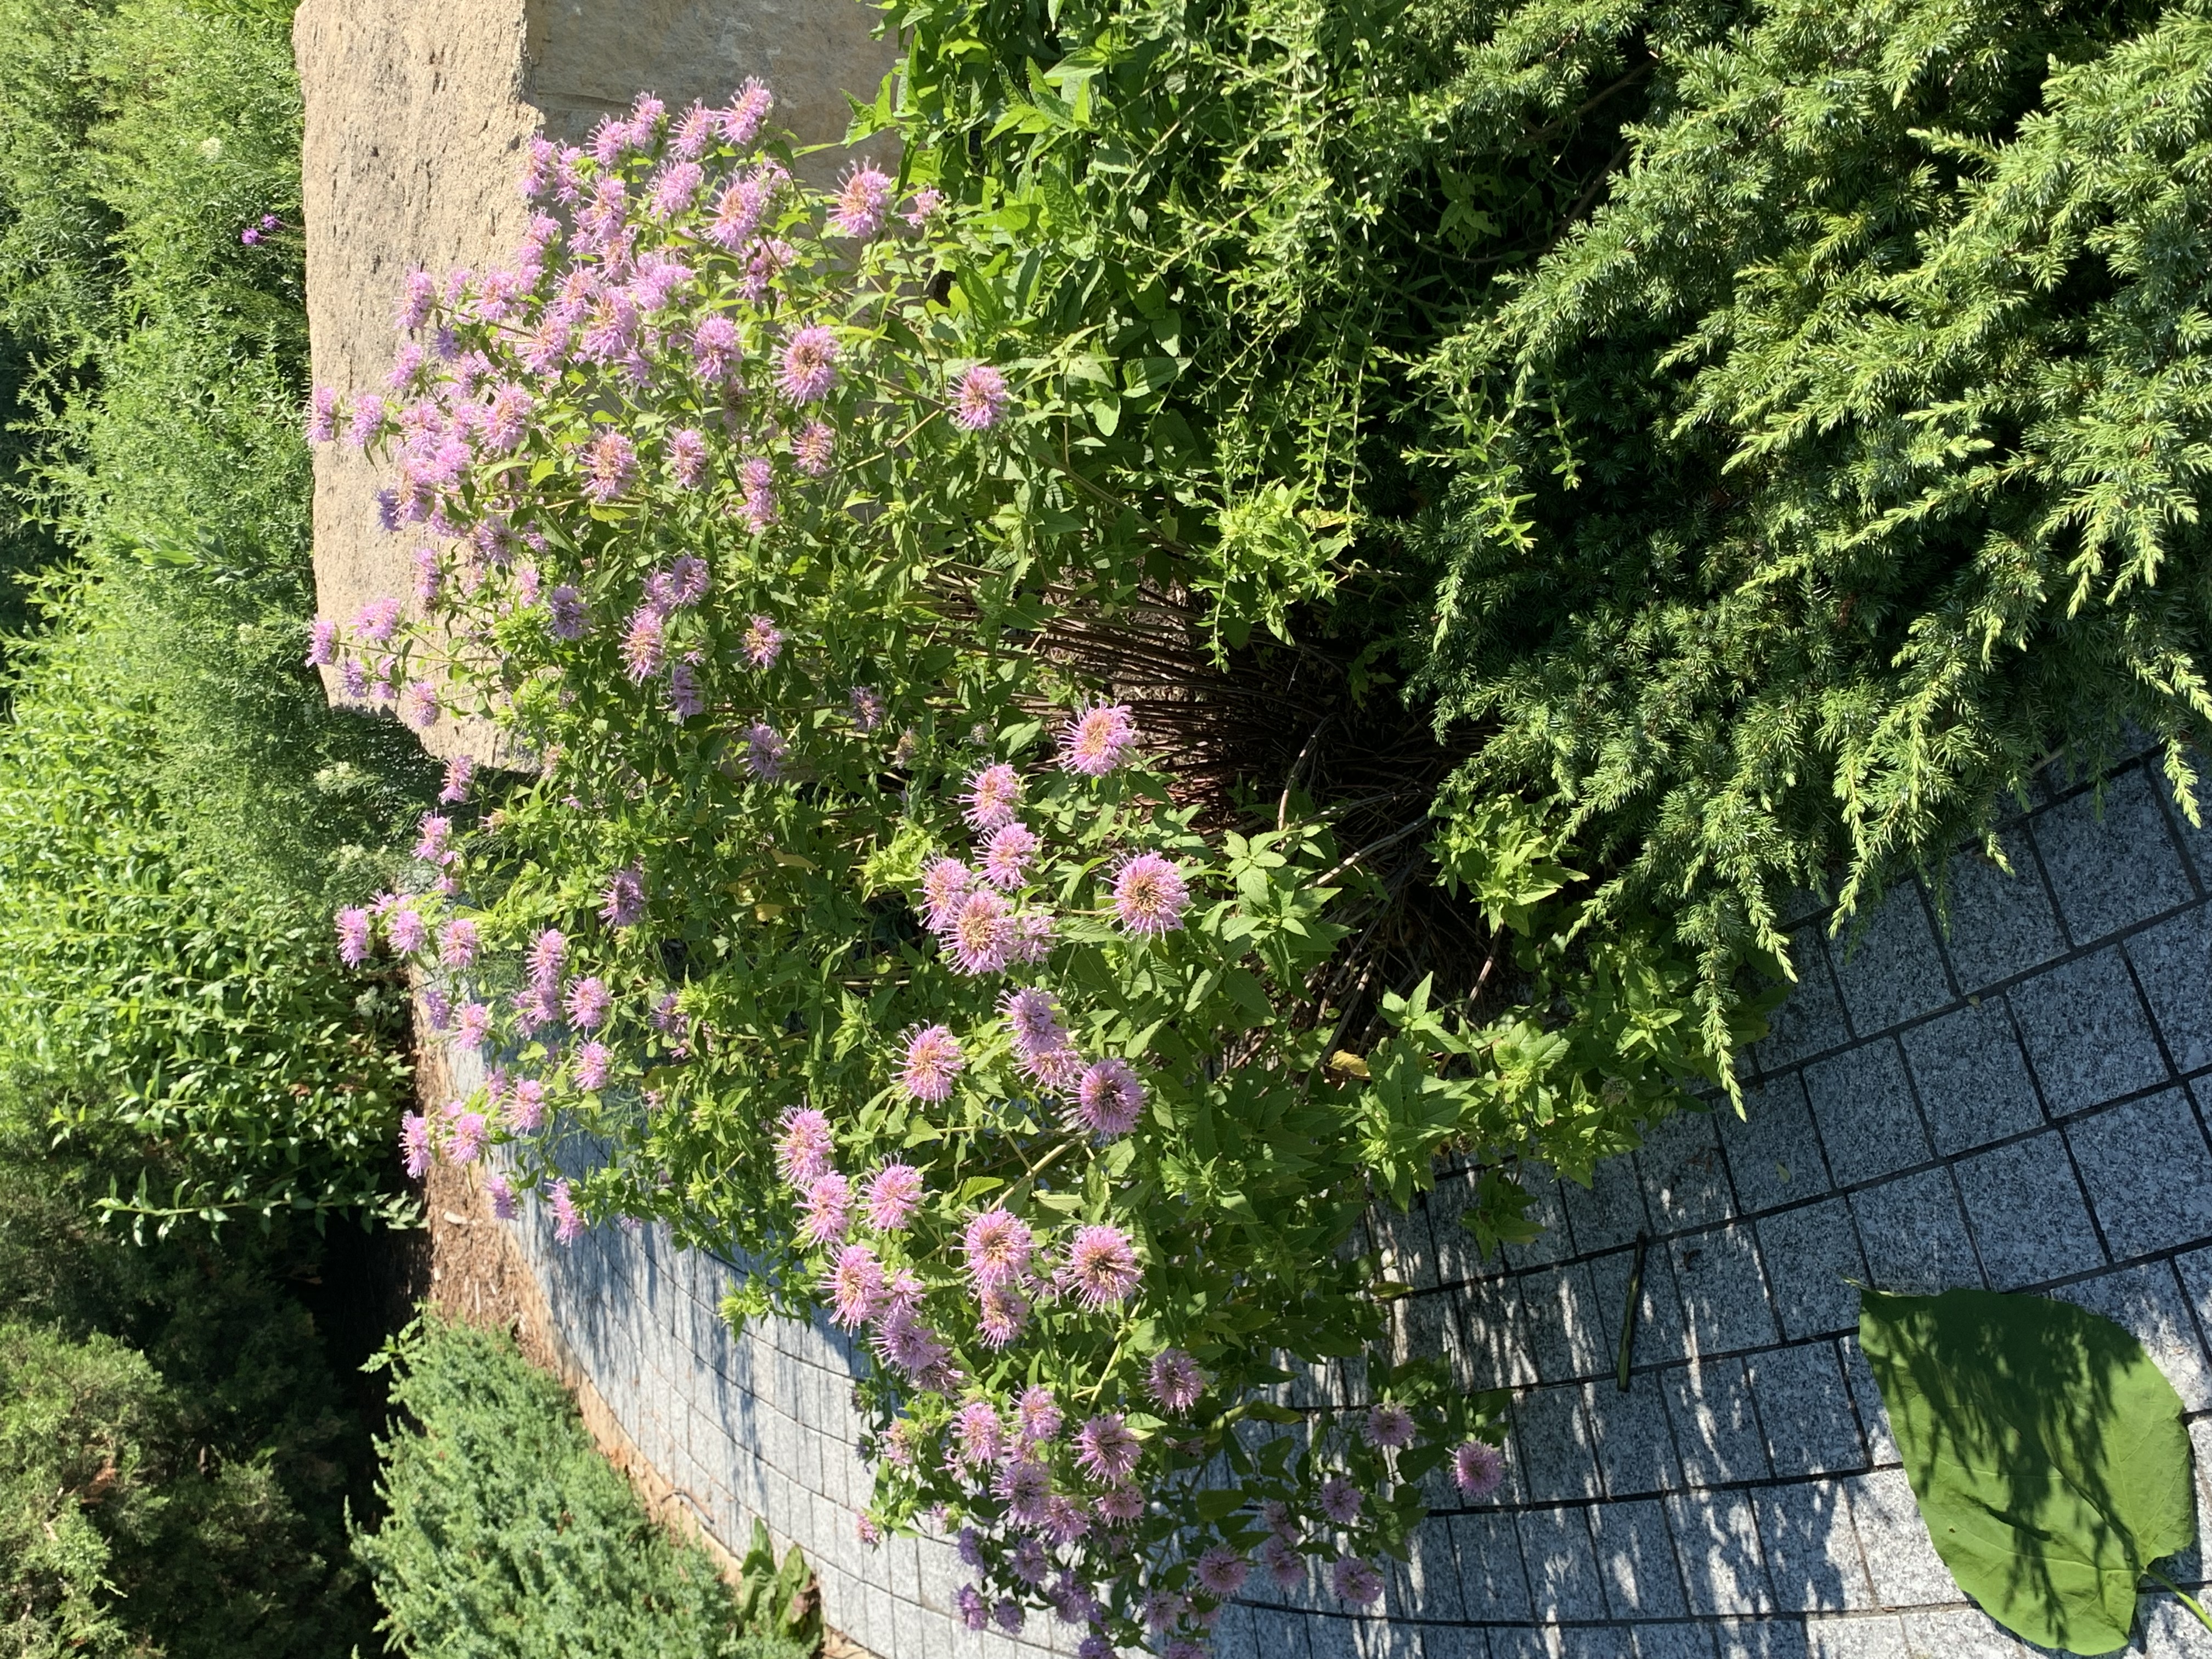 A bush covered in small purple flowers